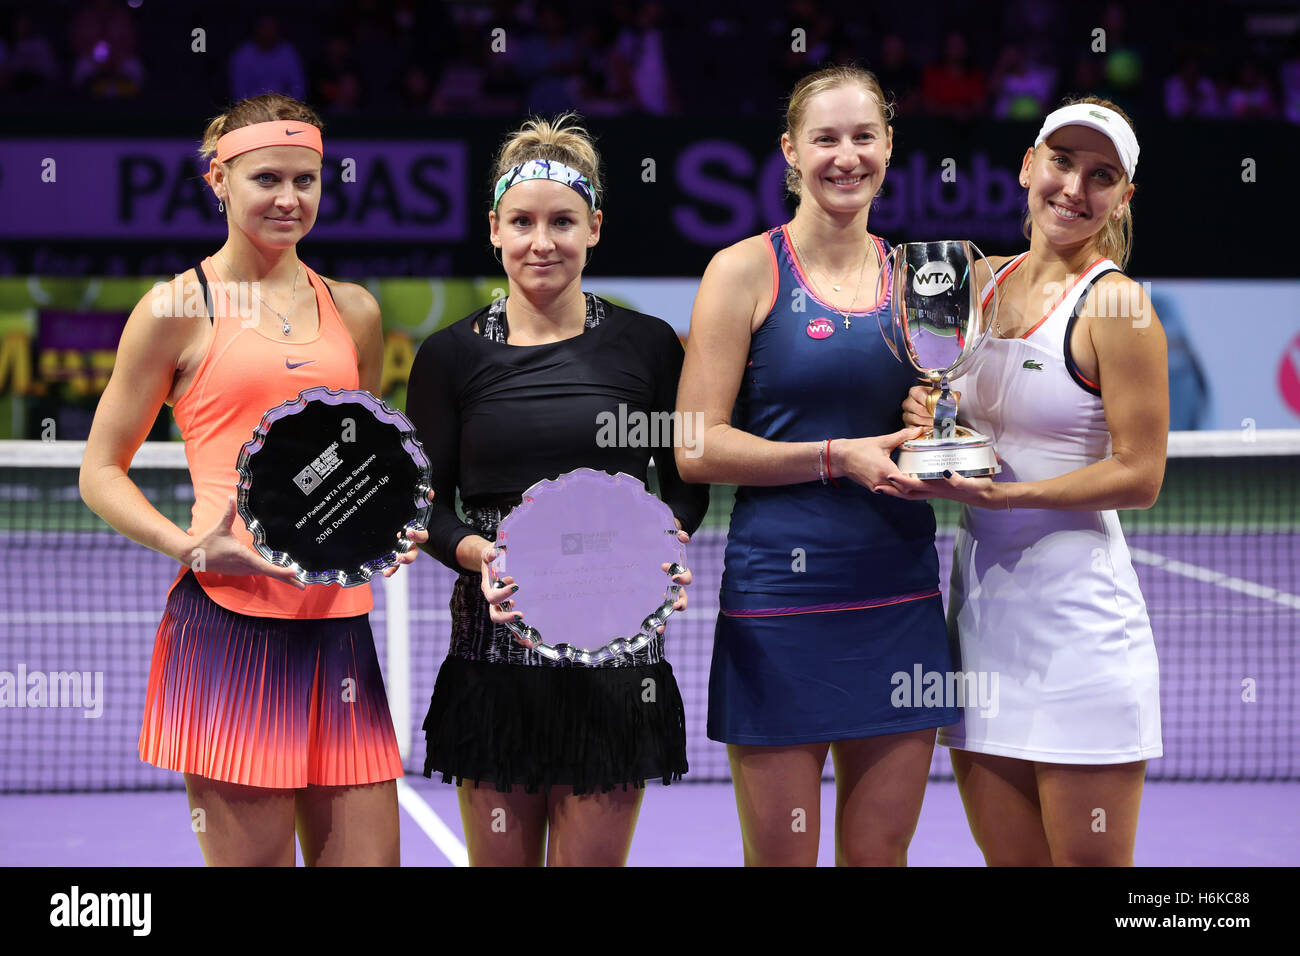 Singapore indoor stadium, Singapore. 30th October, 2016. BNP Paribas WTA finals women tennis association .Russian players Ekaterina Makarova and Elena Vesnina with American player Bethanie Mattek-Sands and Czech player Lucie Safarova with their trophees after the double final Credit:  Yan Lerval/Alamy Live News Stock Photo